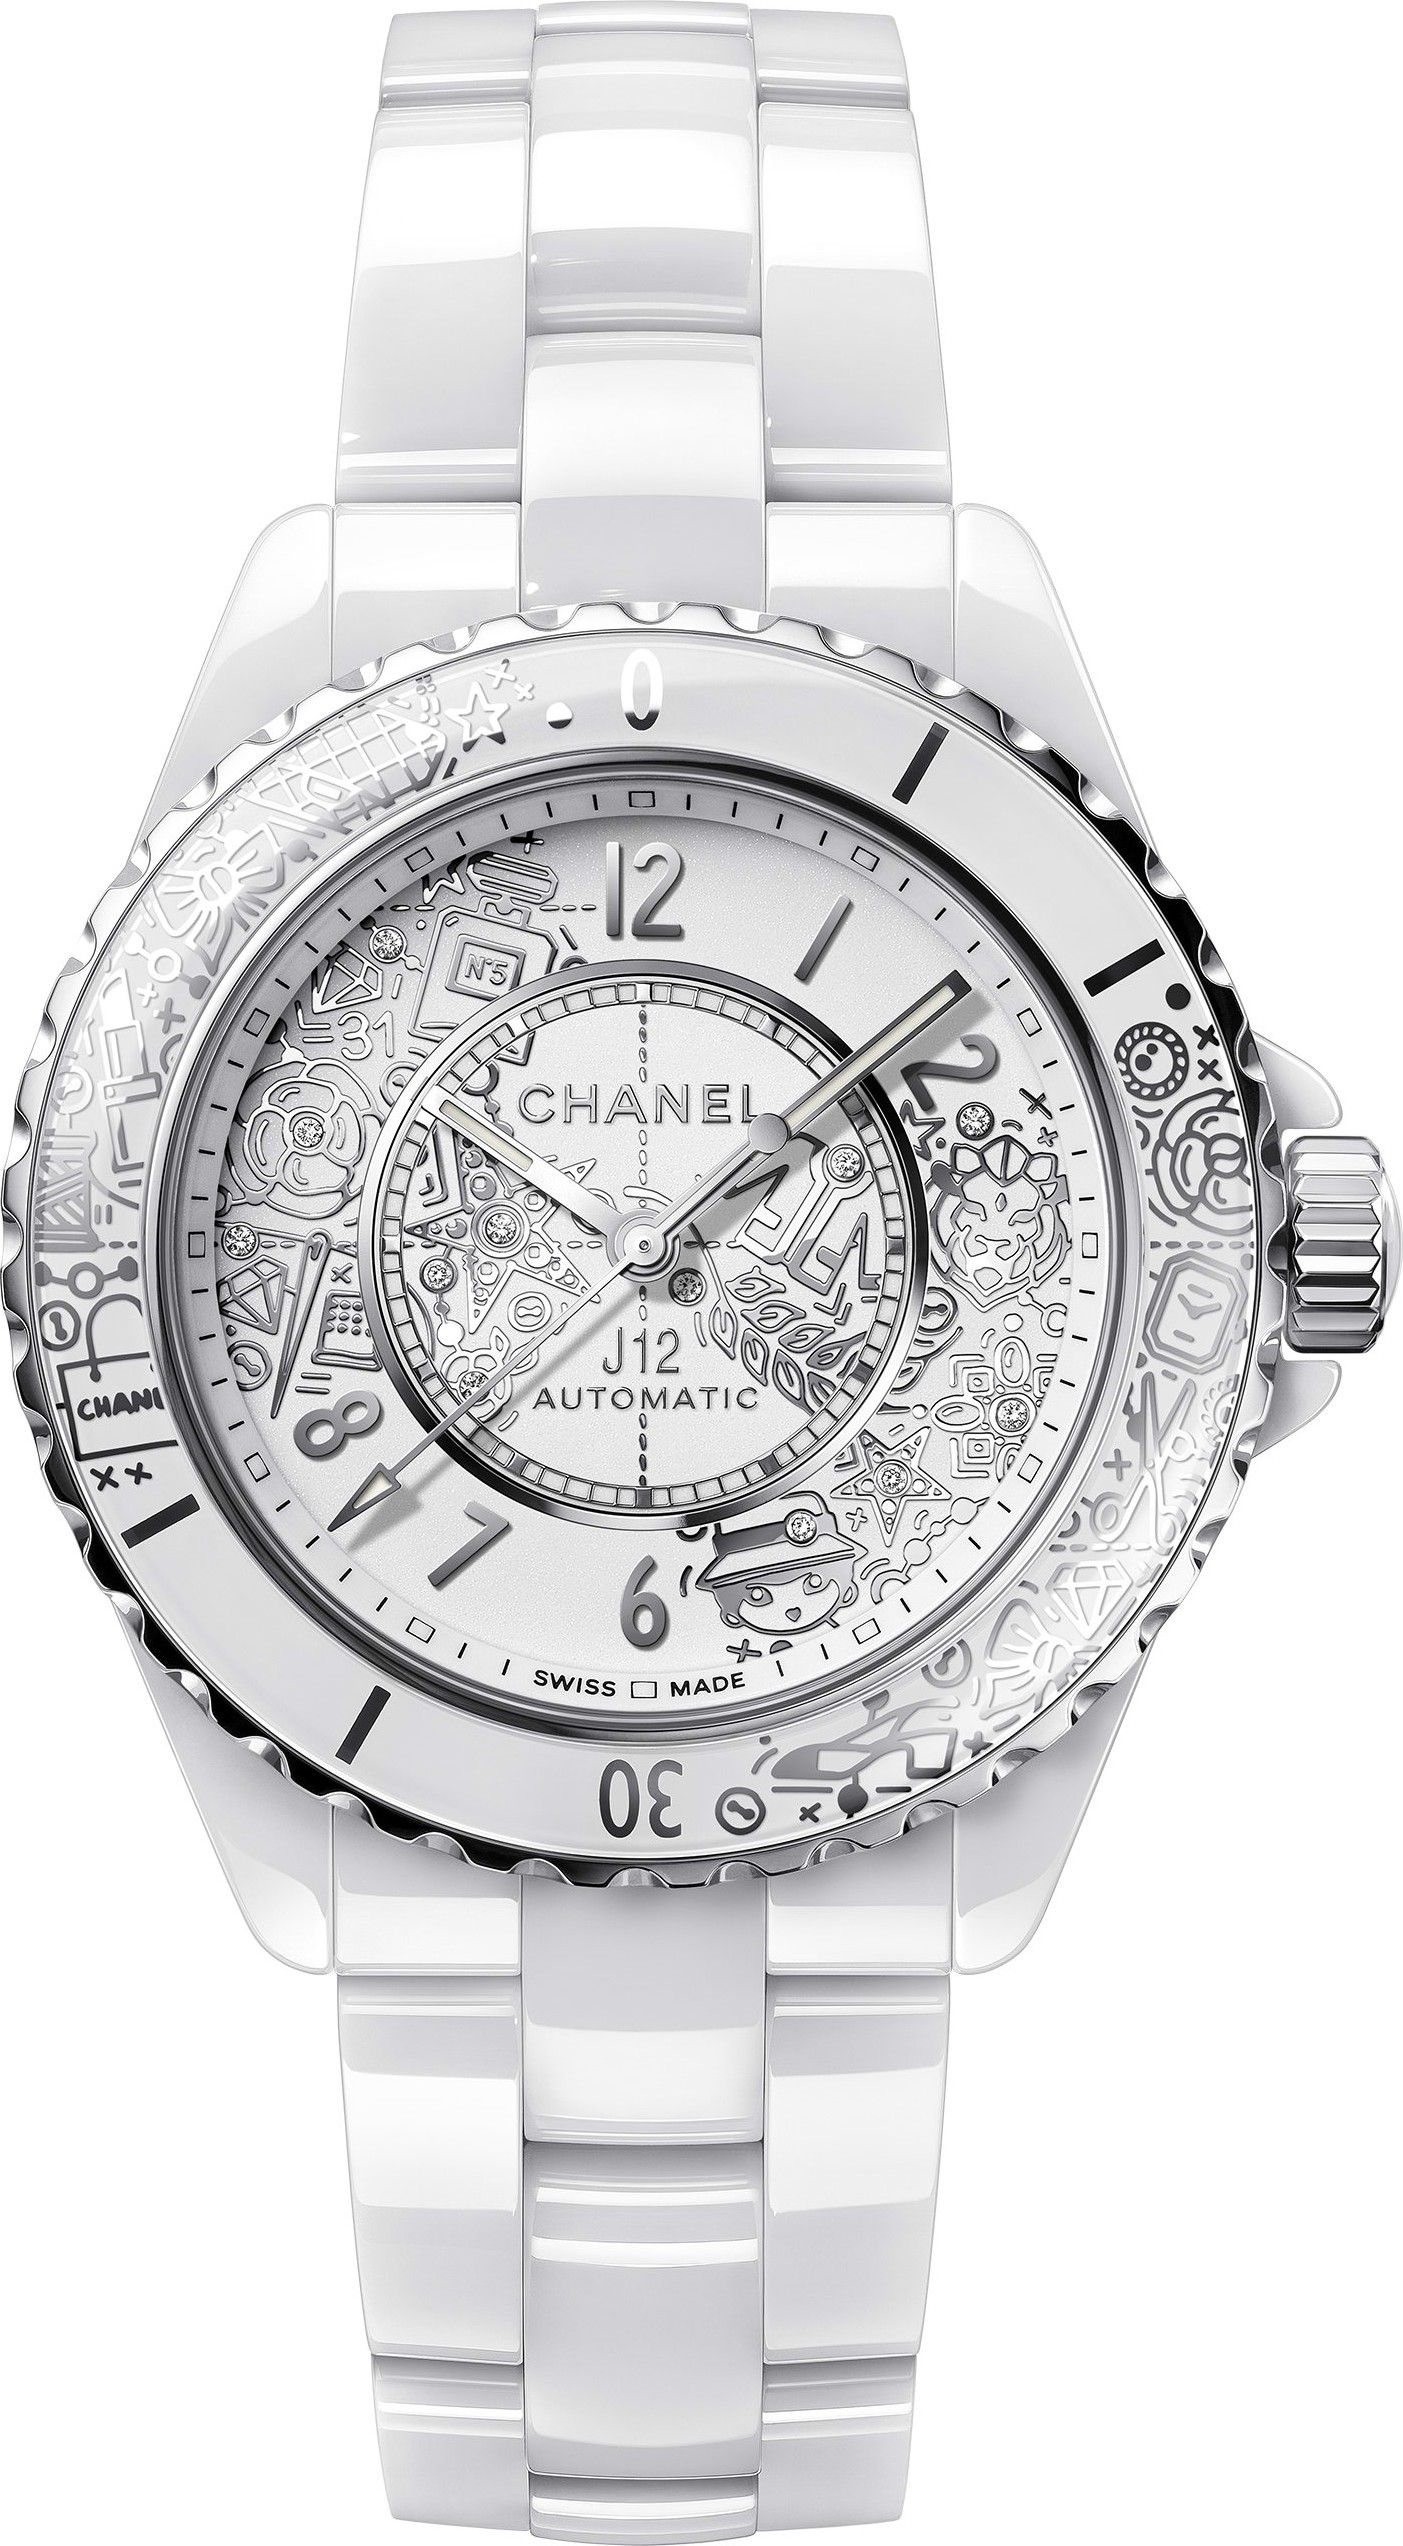 Amazoncom Chanel J12 Moon Phase Mother of Pearl Dial White Ceramic Mens  Watch H3404  Clothing Shoes  Jewelry